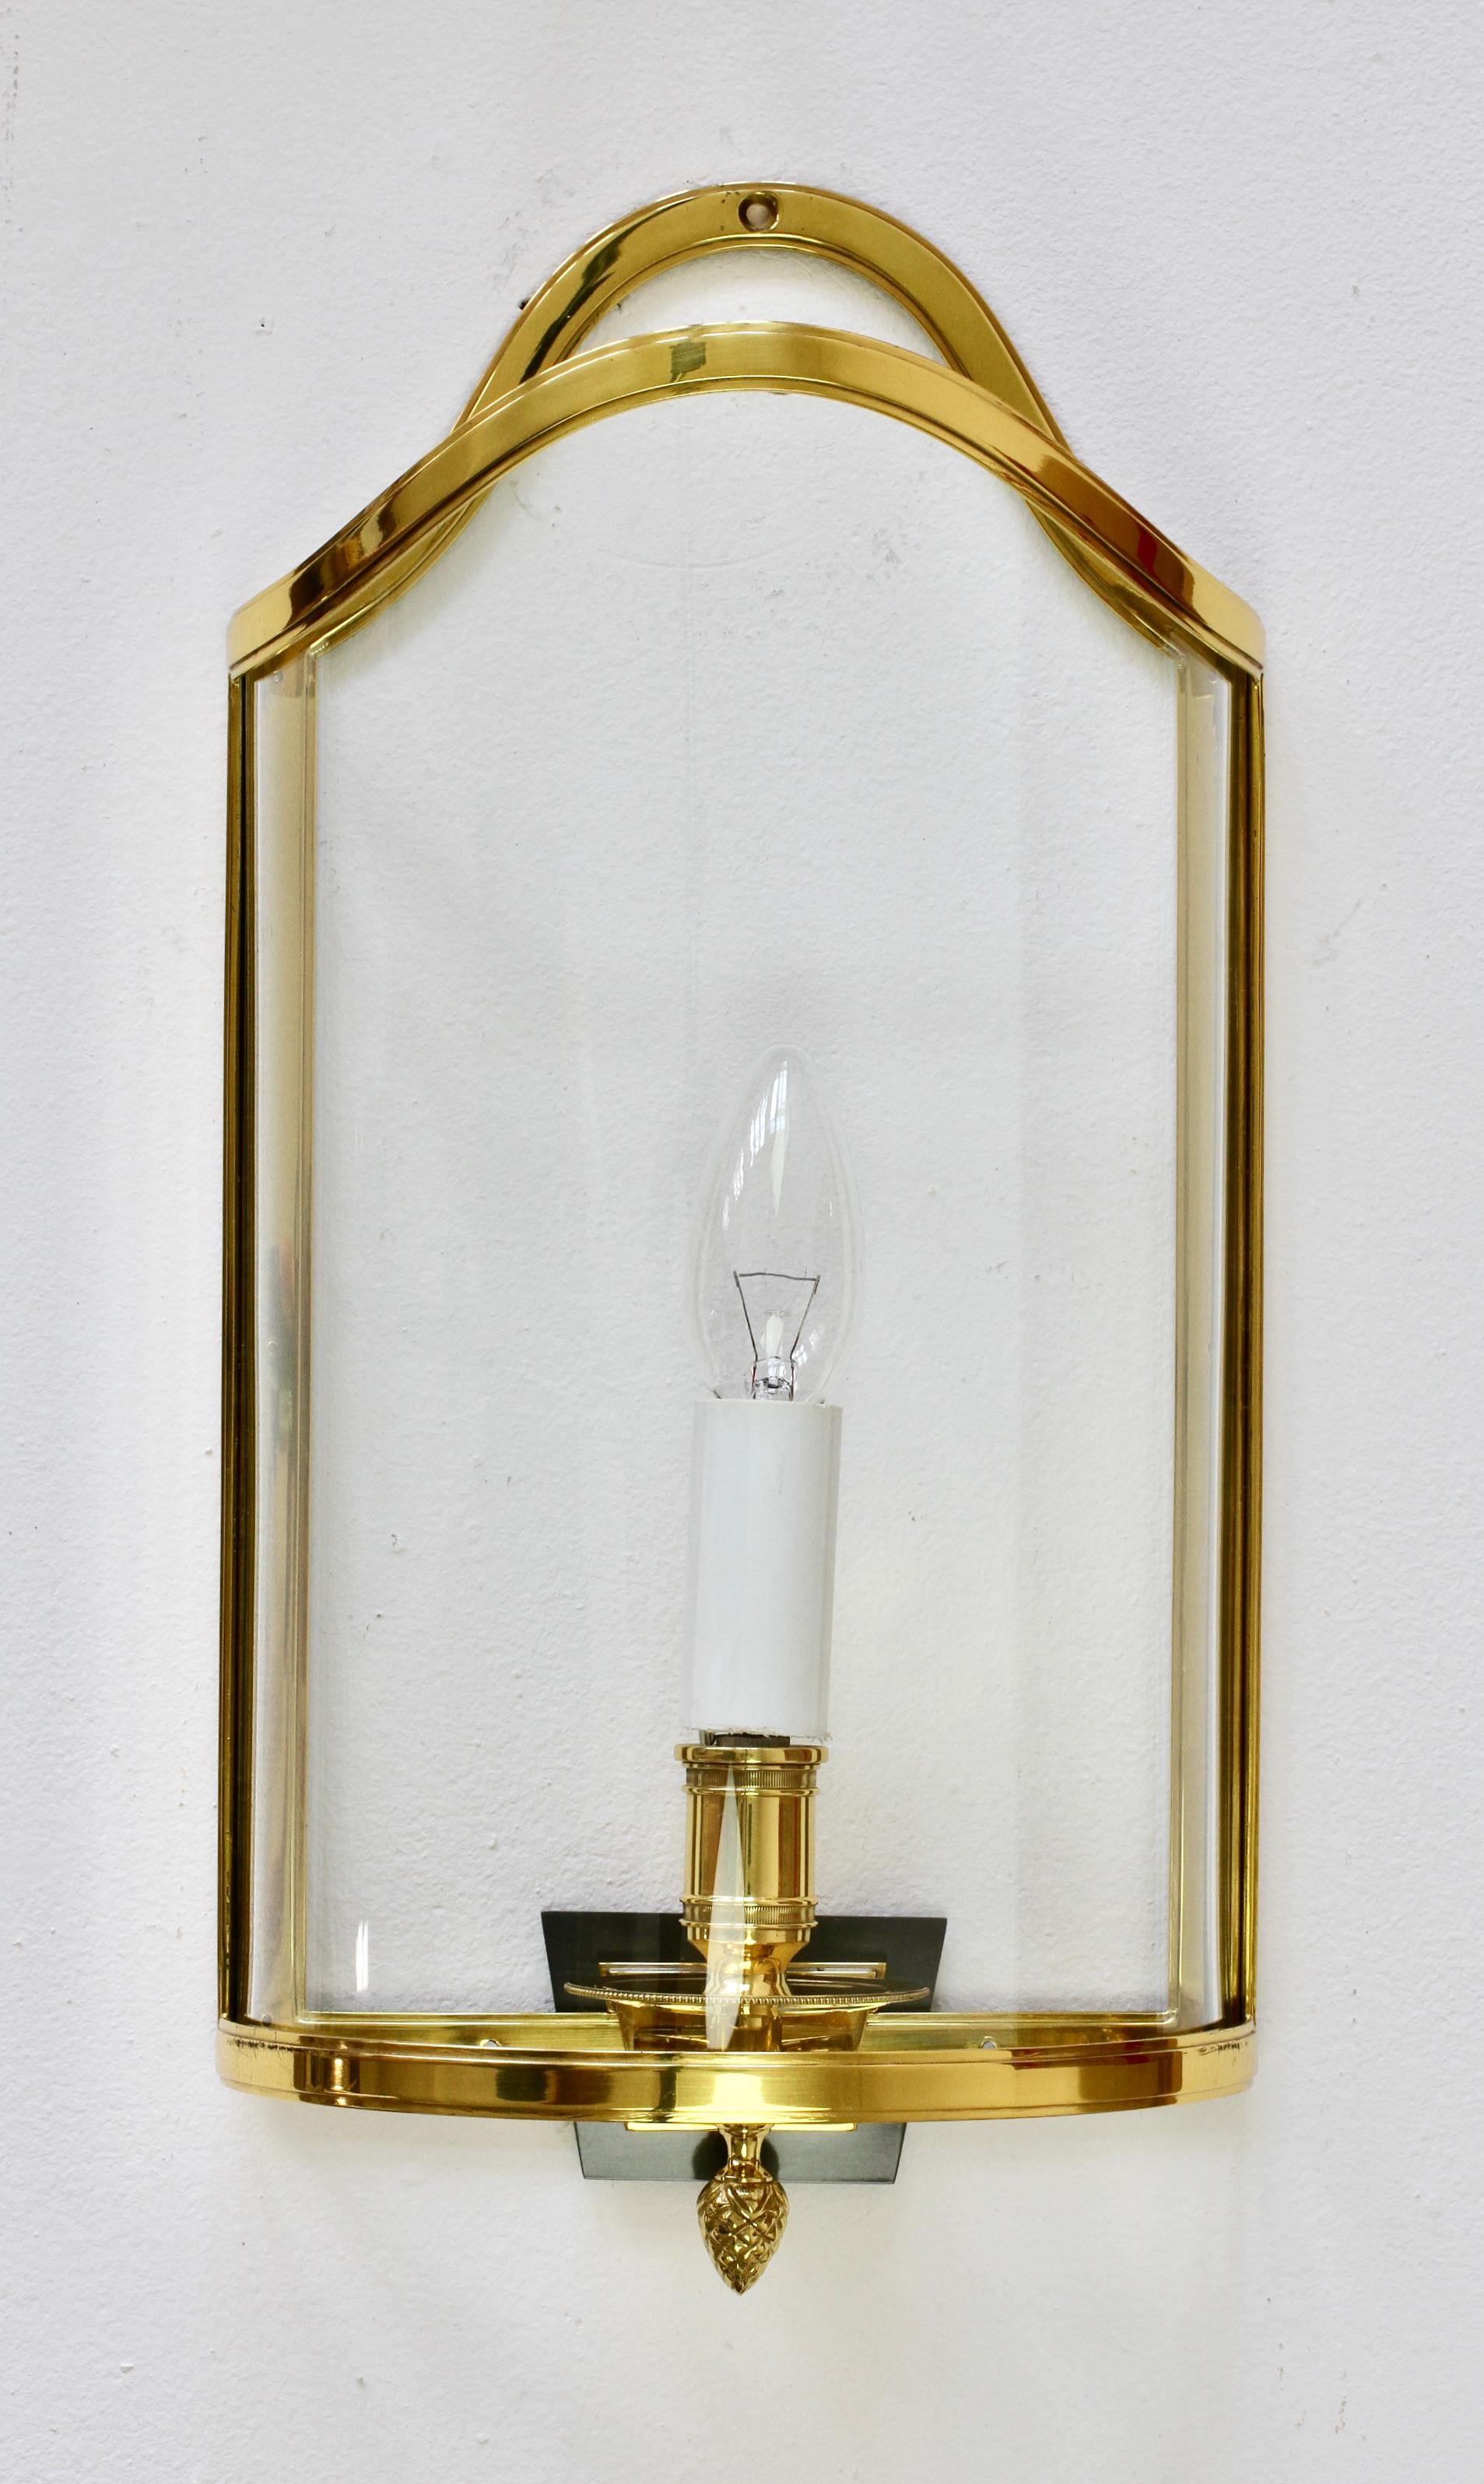 Pair of stunning elegant and large scale vintage midcentury vintage wall lights, lamps or sconces made of polished brass with original curved and cut glass scroll shaped shades by the German united ateliers Vereinigten Werkstätten München (Munich),